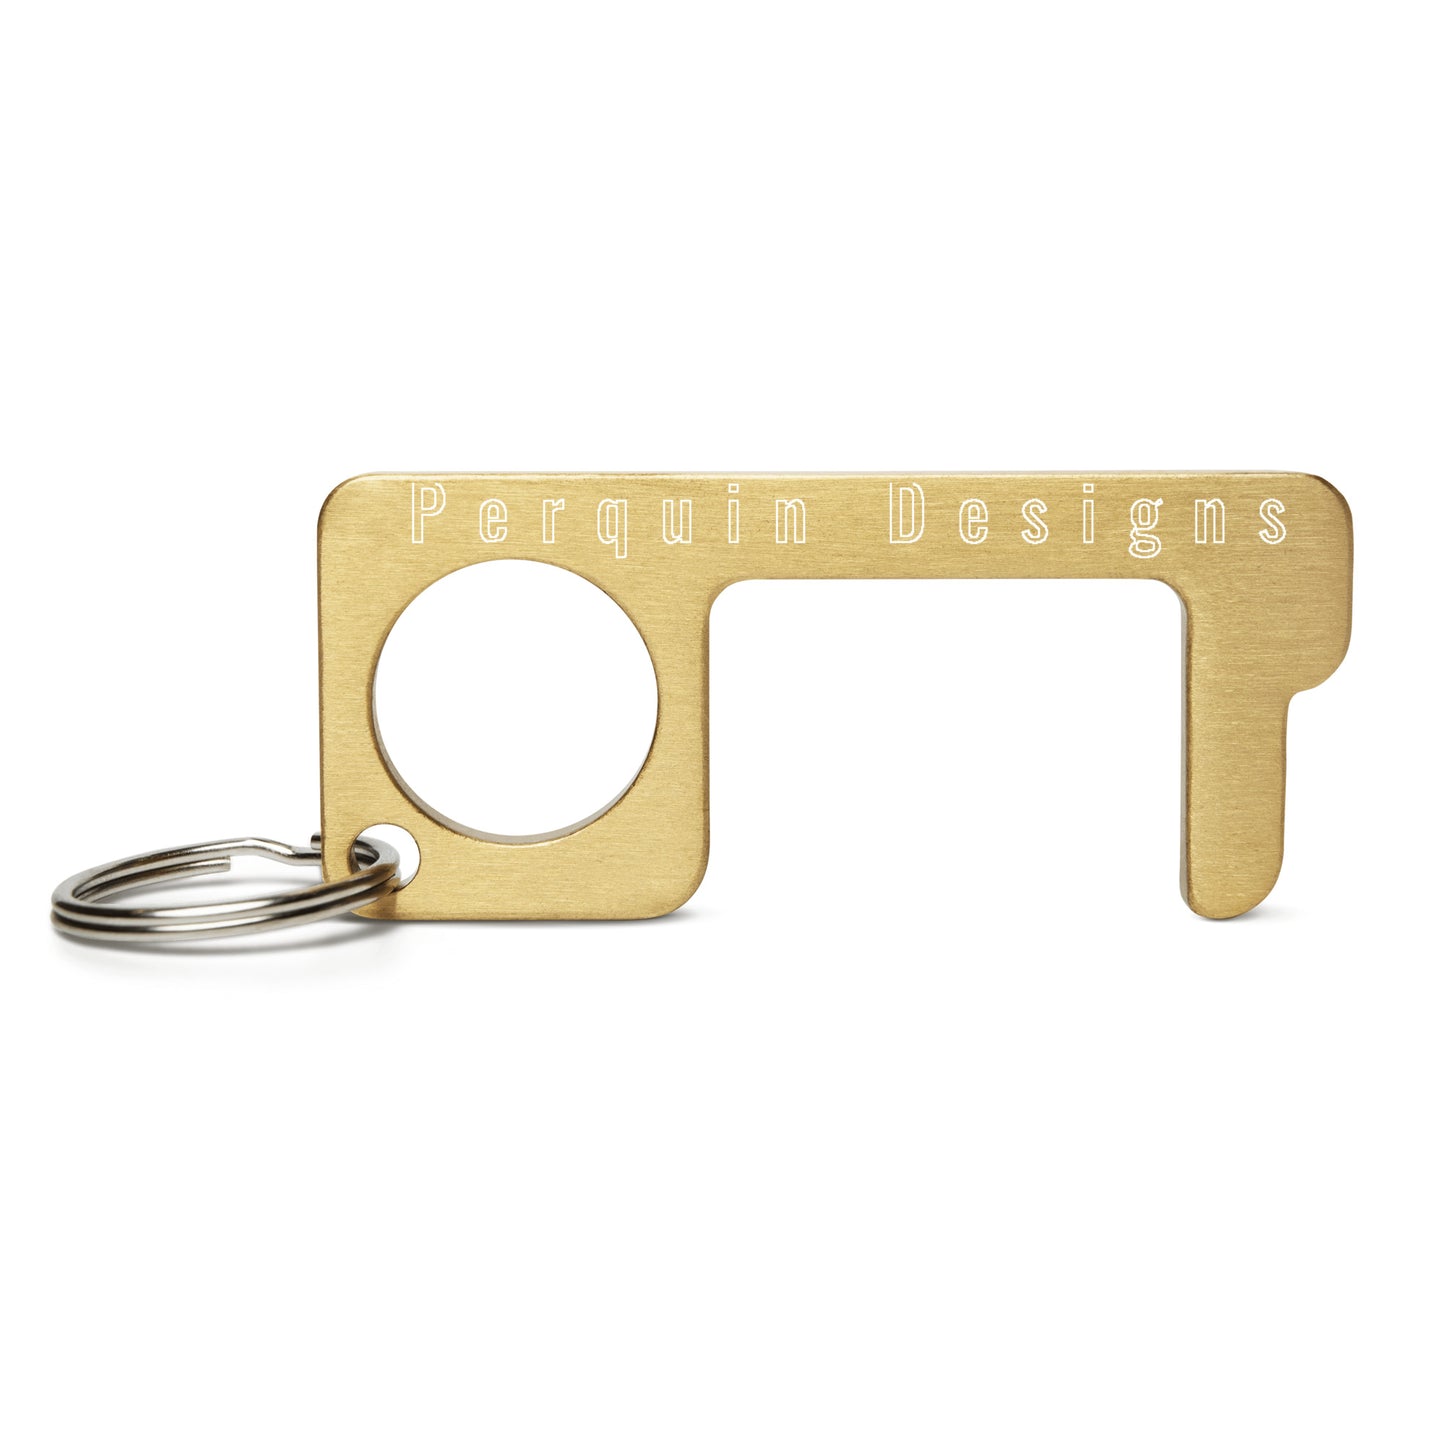 Perquin Designs Engraved Brass Touch Tool Accessory